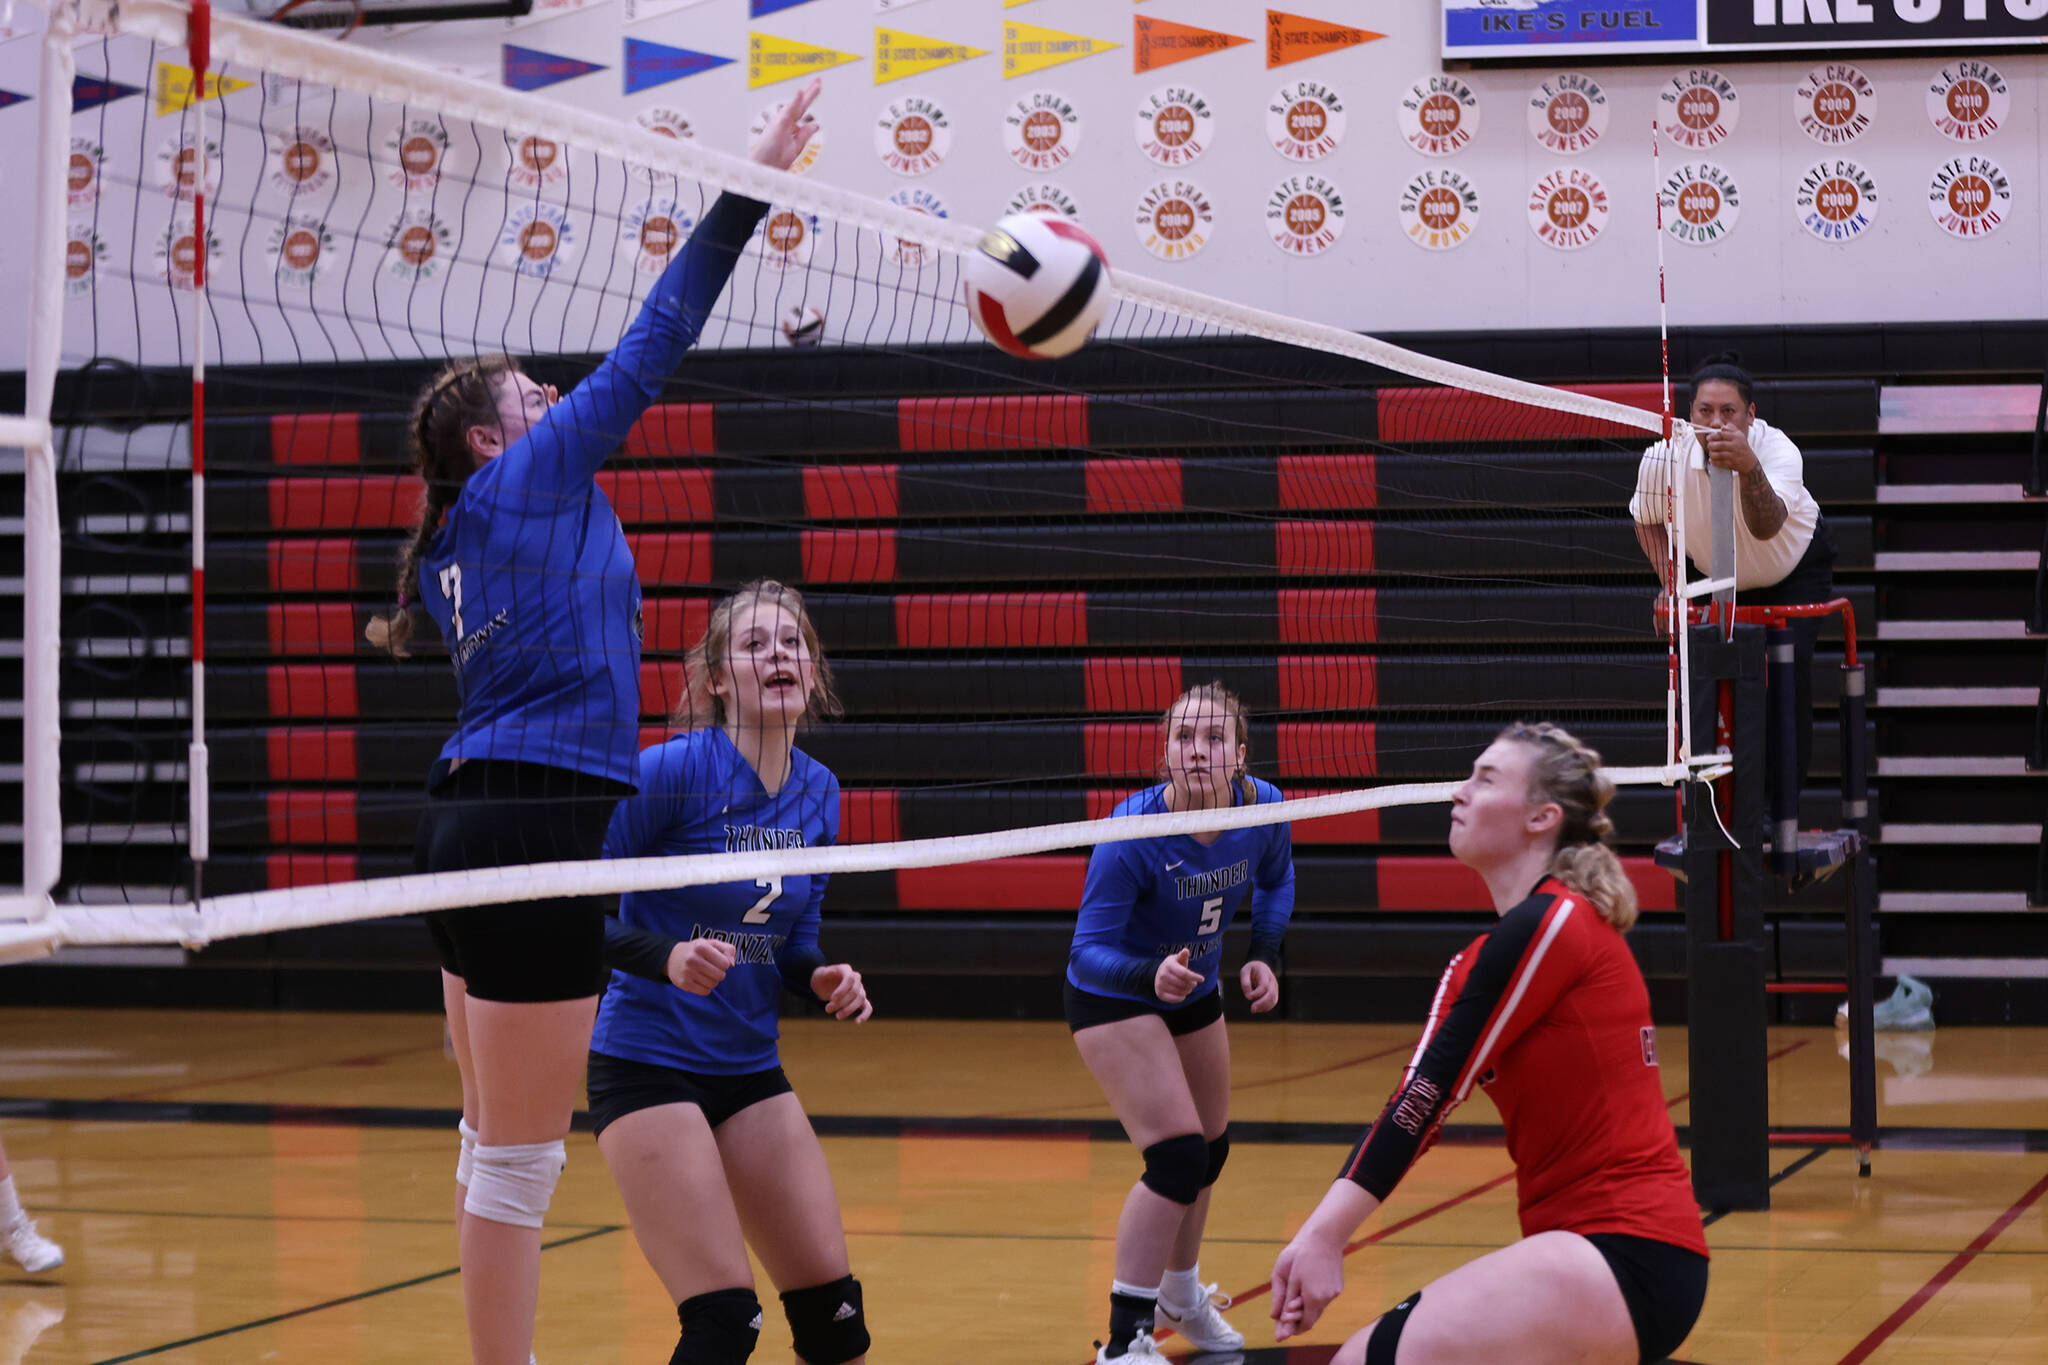 TMHS Kaidree Hartman spikes the ball during an away match against Juneau-Douglas High School: Yadaa.at Kalé while her teammates Mallory Welling (2) and Ashlyn Gates (5) look on with anticipation. JDHS’ Ashley Laudert gets ready to dig the ball. (Ben Hohenstatt / Juneau Empire File)